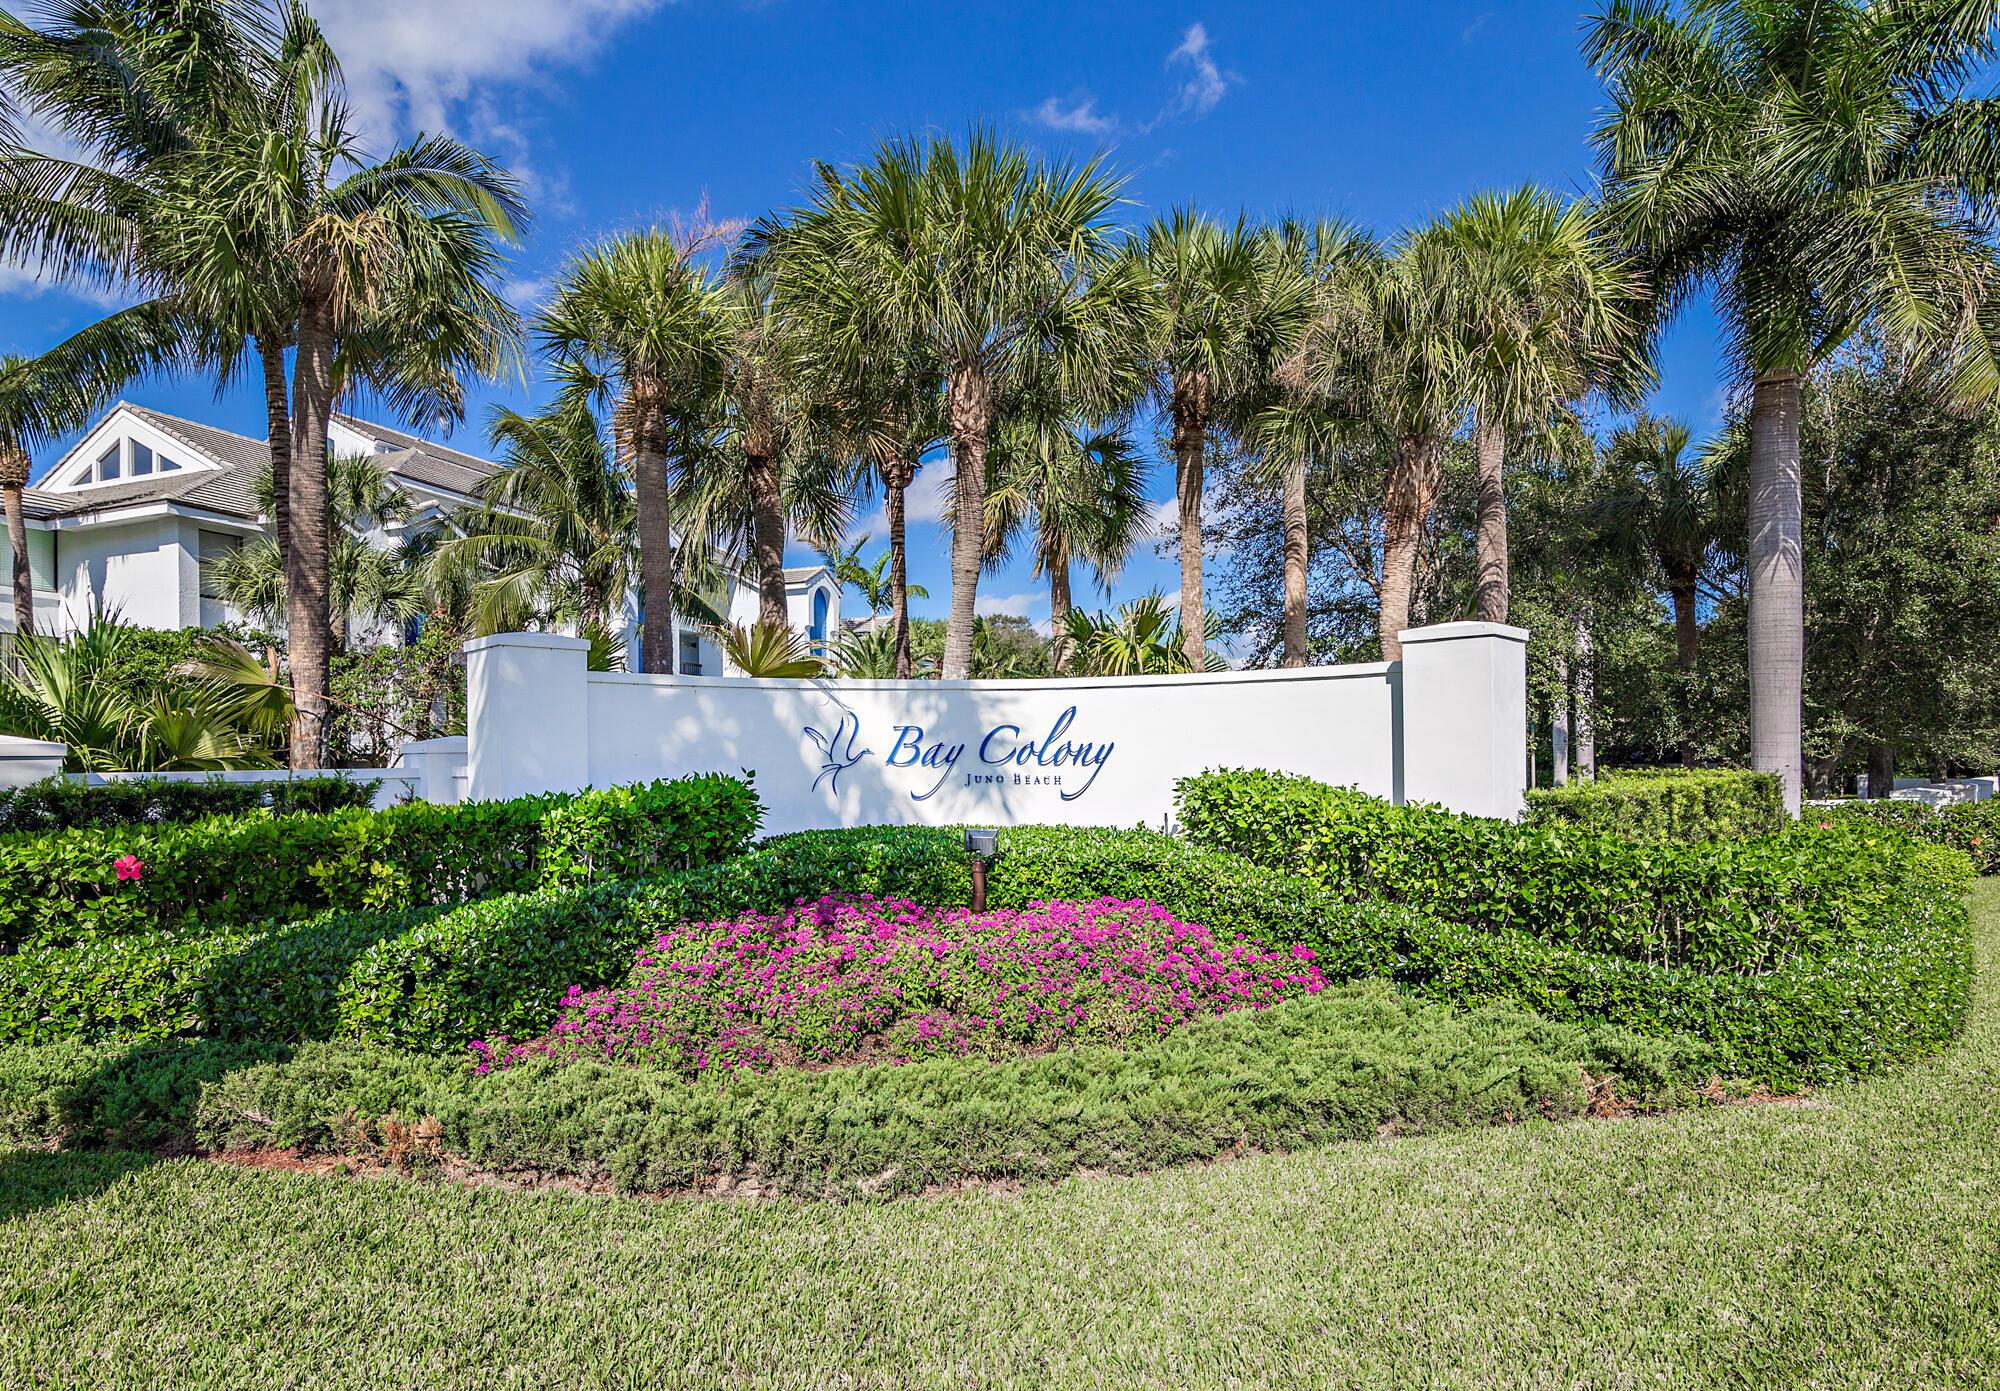 Immaculate two bedroom two bathroom unit with a resort view at Bay Colony. This unit, built in 2014, boasts close to 1700sq. ft. of living space with massive living room with custom modern entertainment center and 2 full baths. Beautiful tile throughout the living space. Countless upgrades including new designer brand appliances, backsplash, shutters and new paint throughout, California closets, upgraded sink and granite in kitchen This waterfront community has a private marina with boat slips available for up to 50' boats. Resort-style amenities include a heated pool/spa, tennis, pickle-ball, and newly updated clubhouse. Located close to the beach, airport, fabulous shopping and excellent restaurants. This condo shows like a model and is a must-see!!